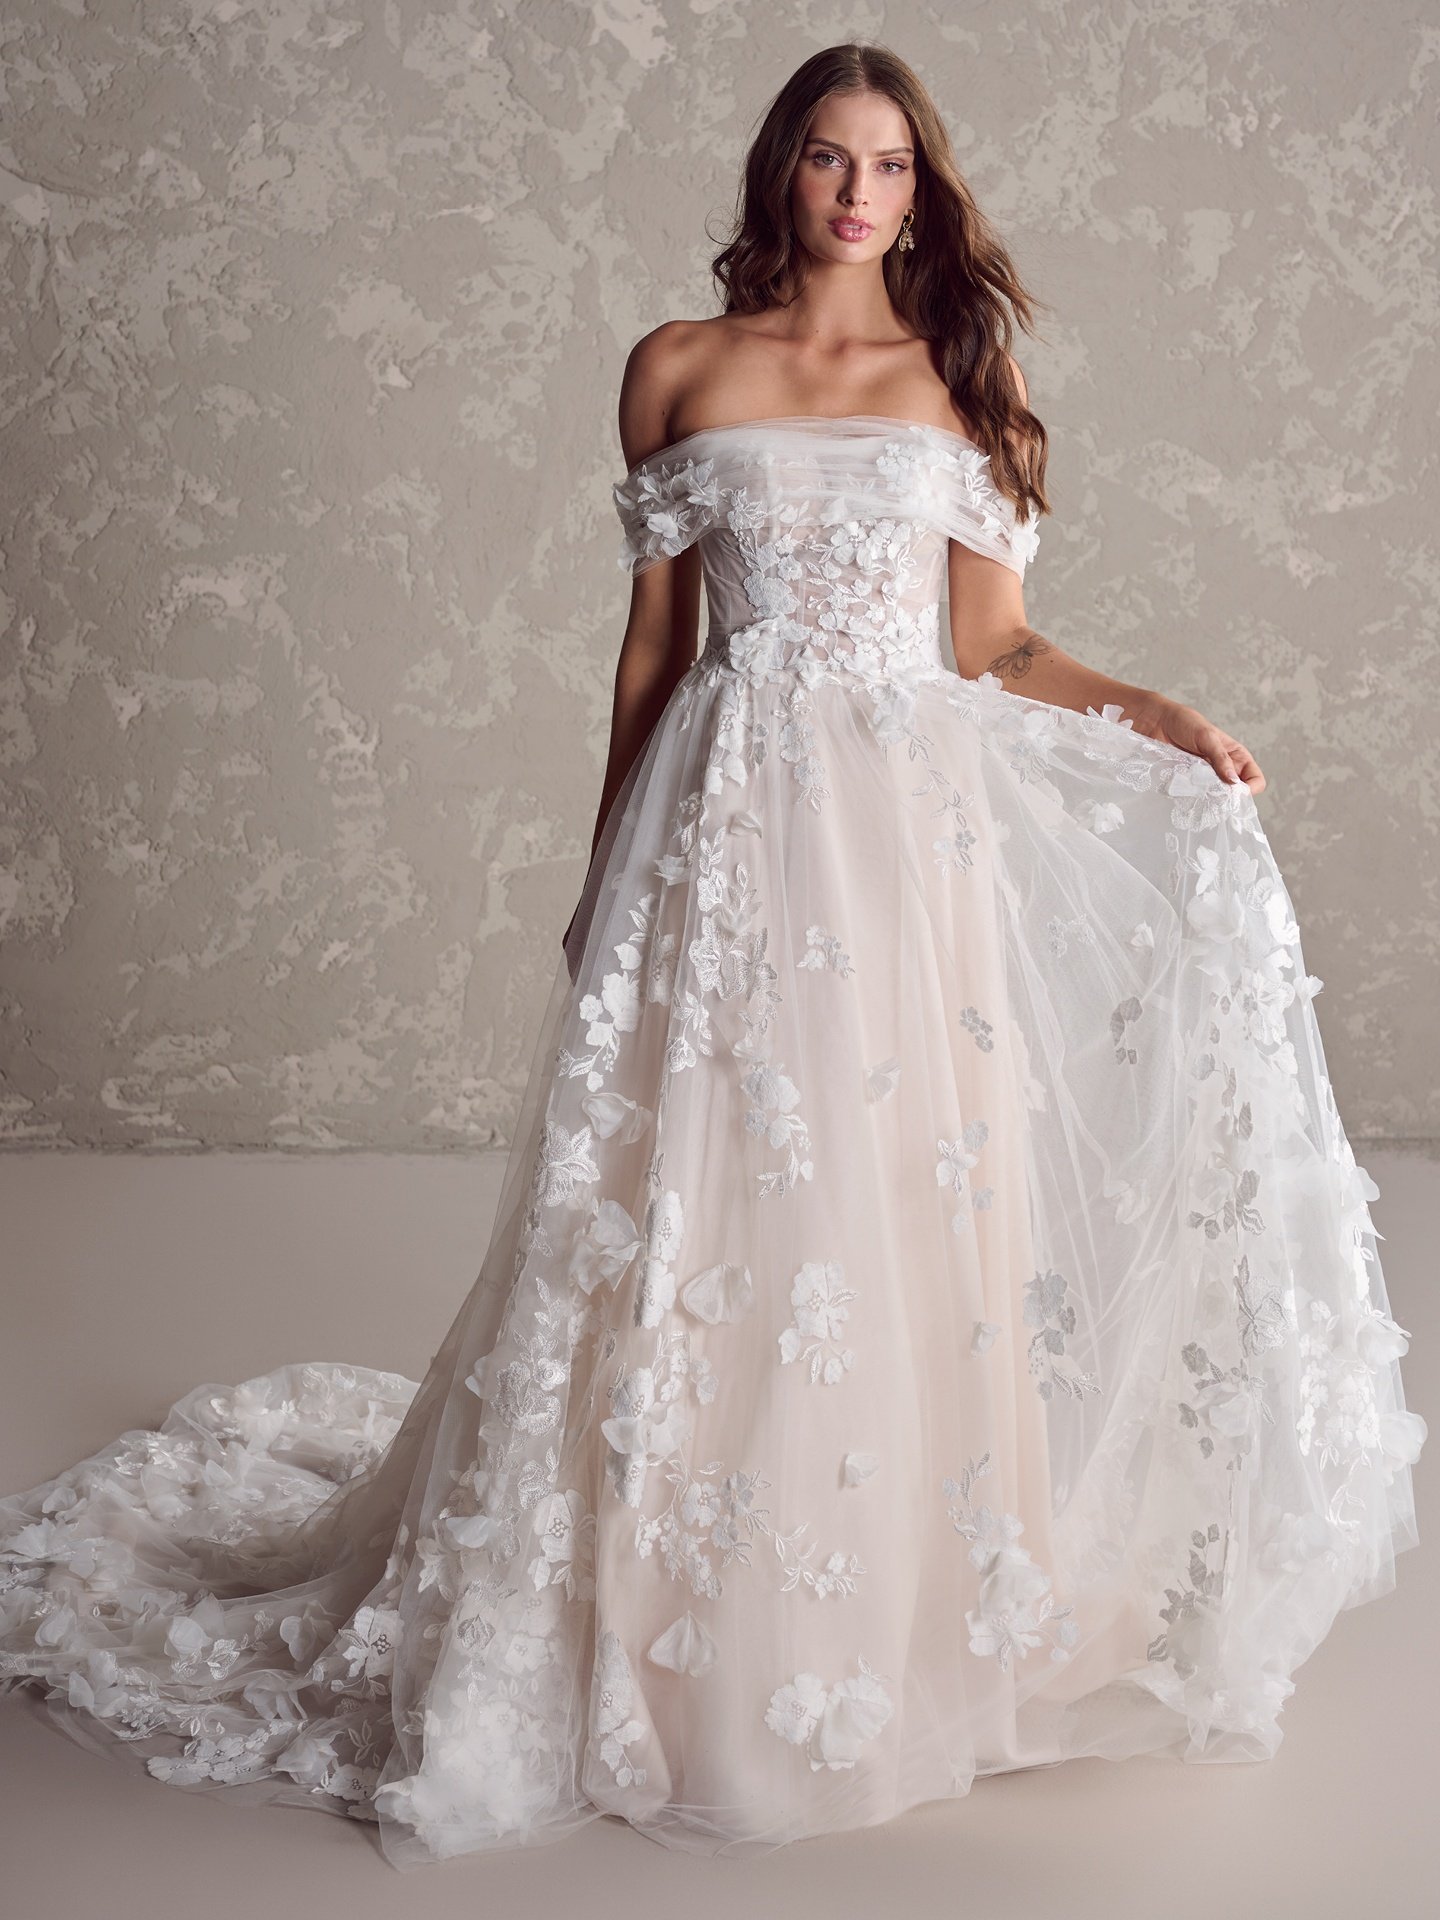 Maggie Sottero - Click to see more!